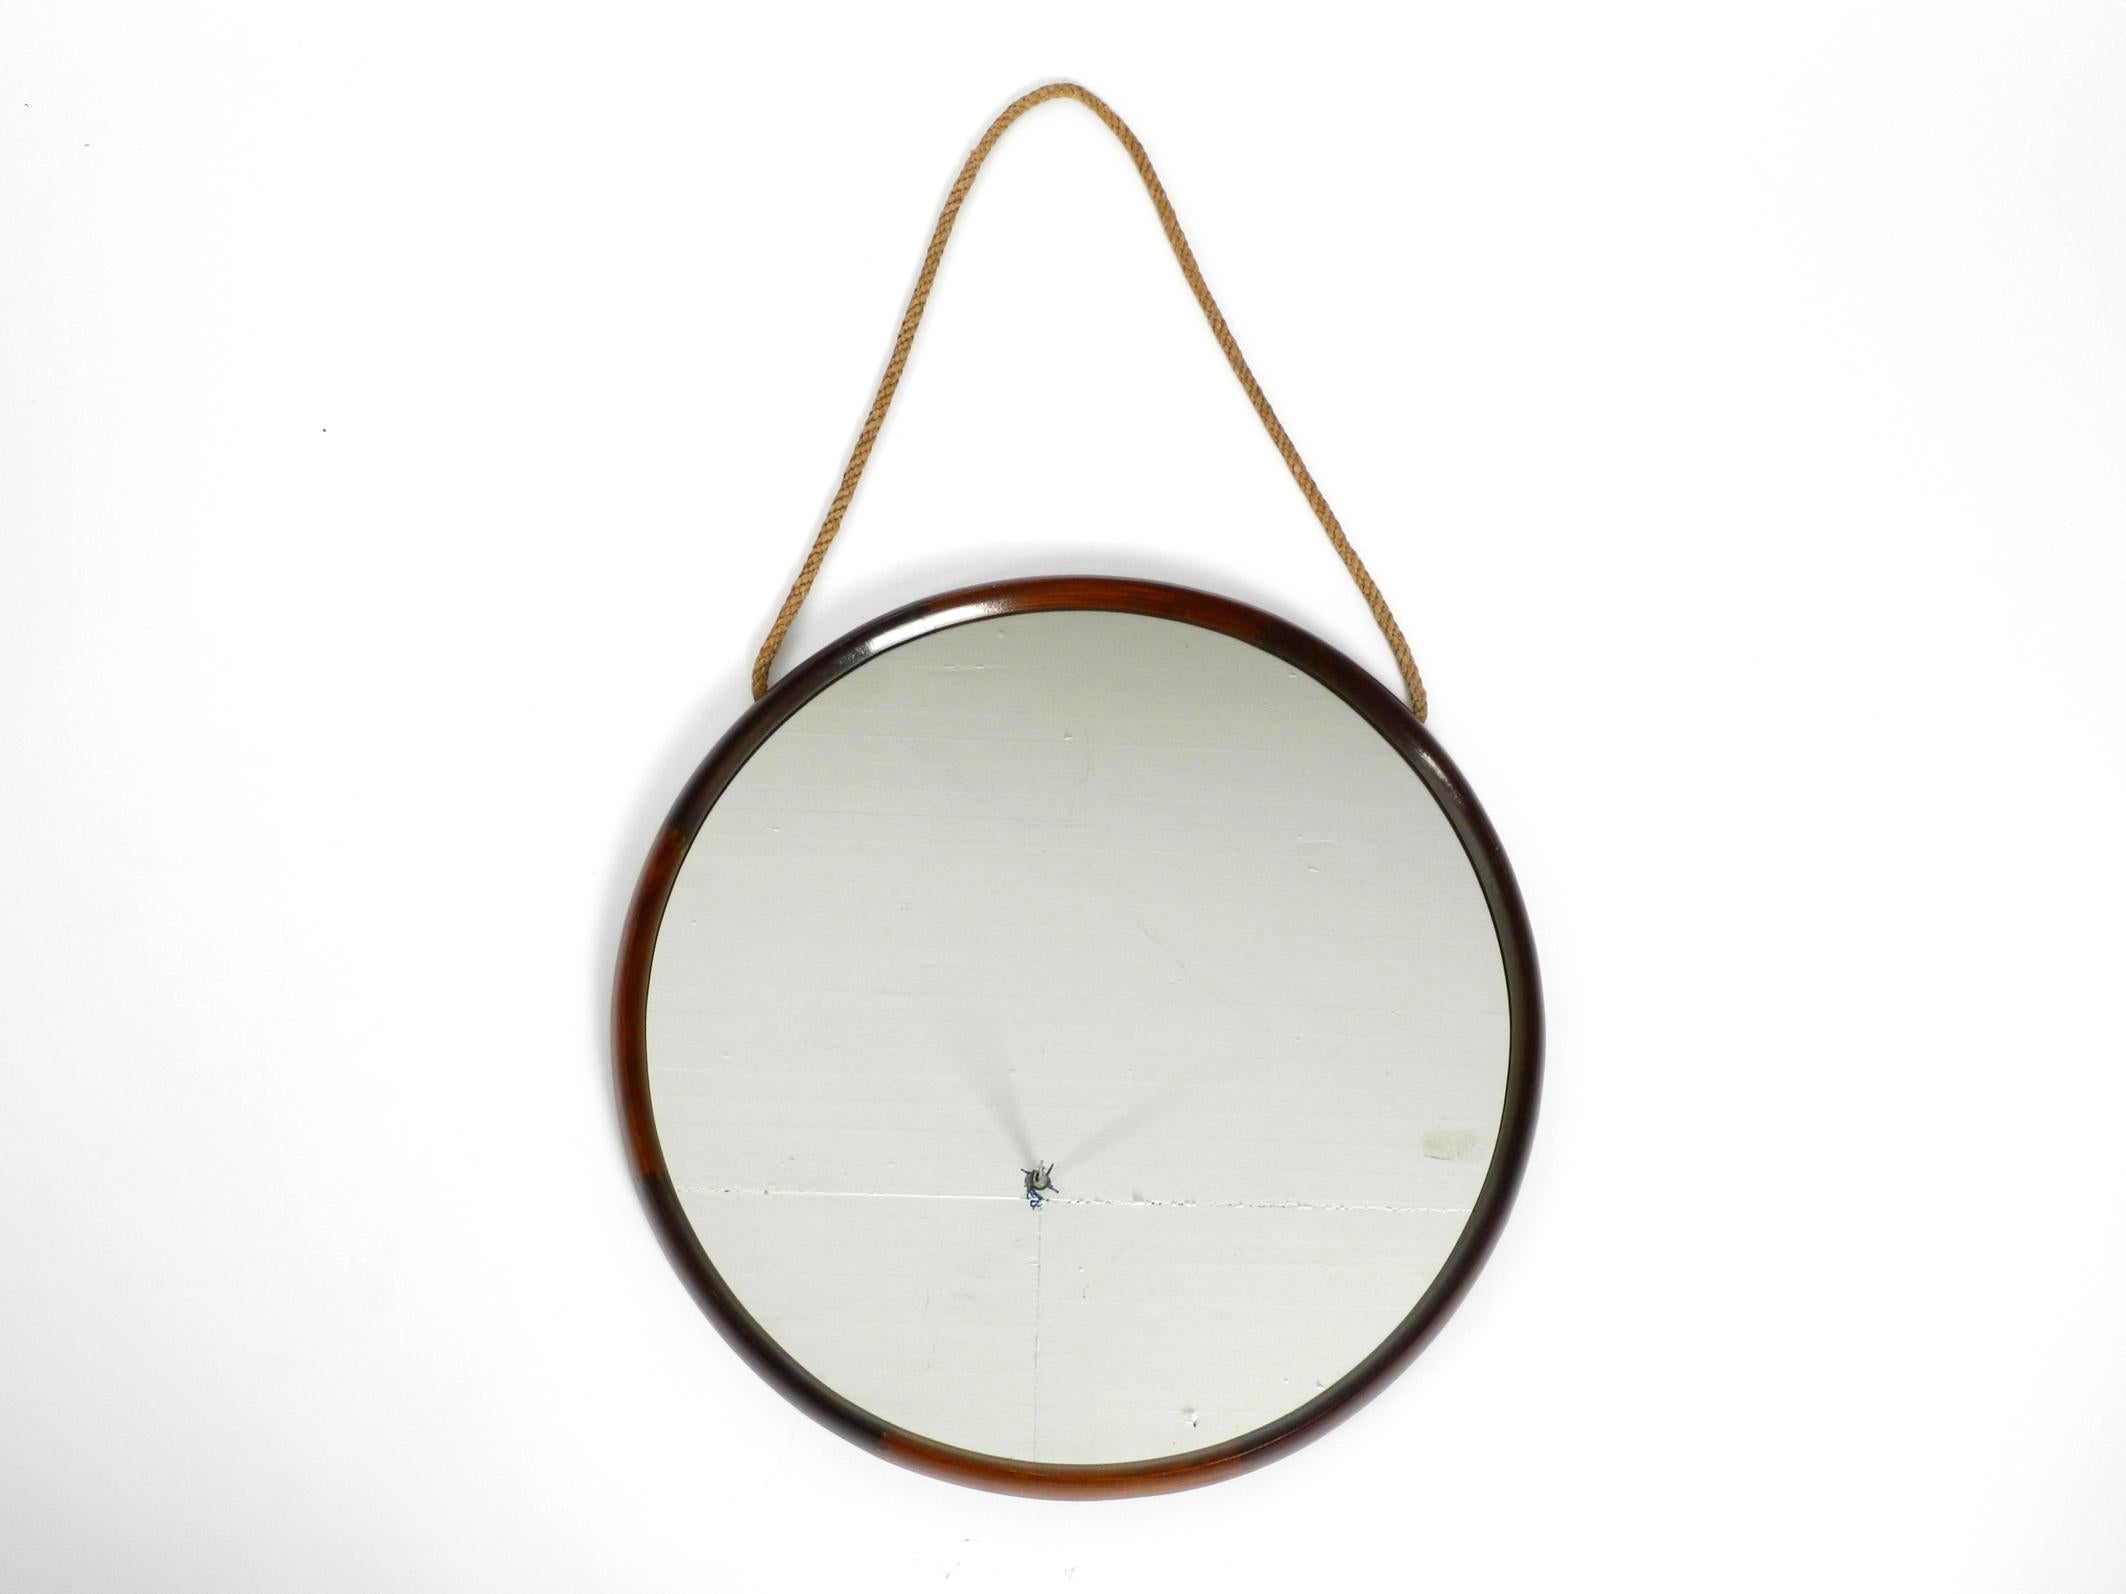 Round, original, large, beautiful wall mirror with a teak frame. Made in Italy.
The original thick knitted hanging rope is made of jute or sisal, it is undamaged and sturdy.
Very high quality workmanship in a Minimalist Italian design.
100%